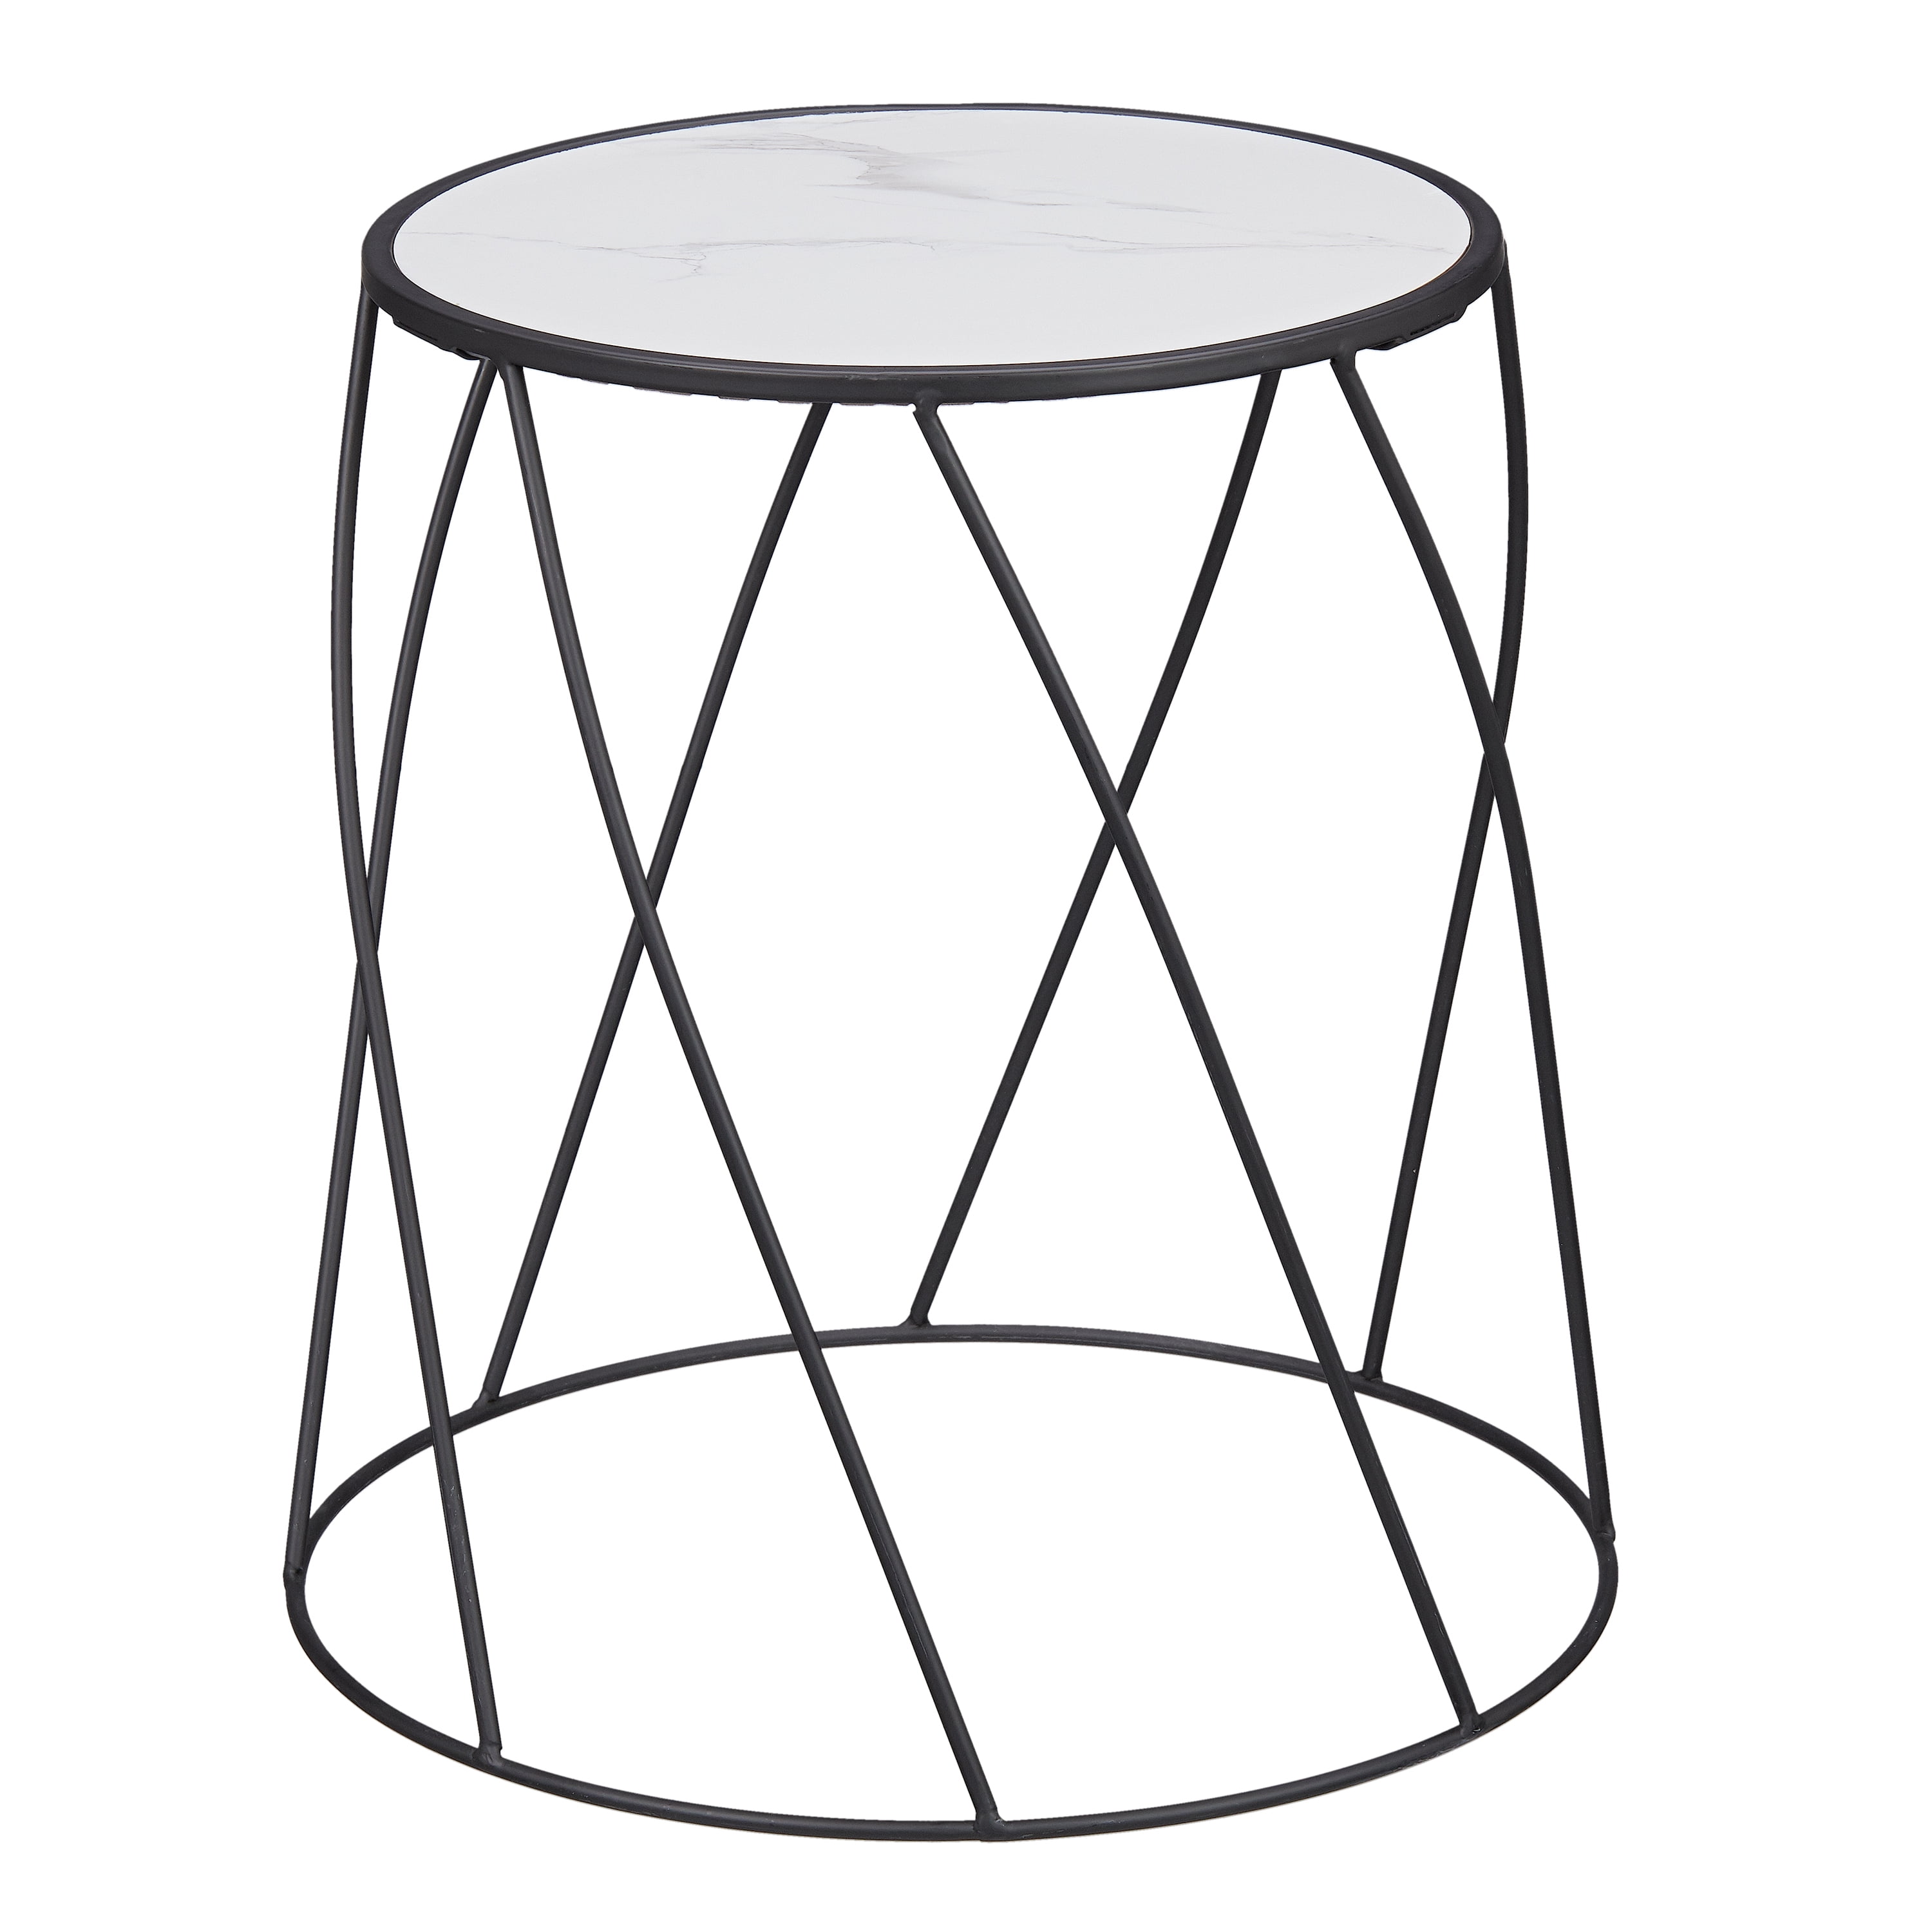 Better Homes & Gardens 15" Round Matte Black Faux Marble Top Plant Stand